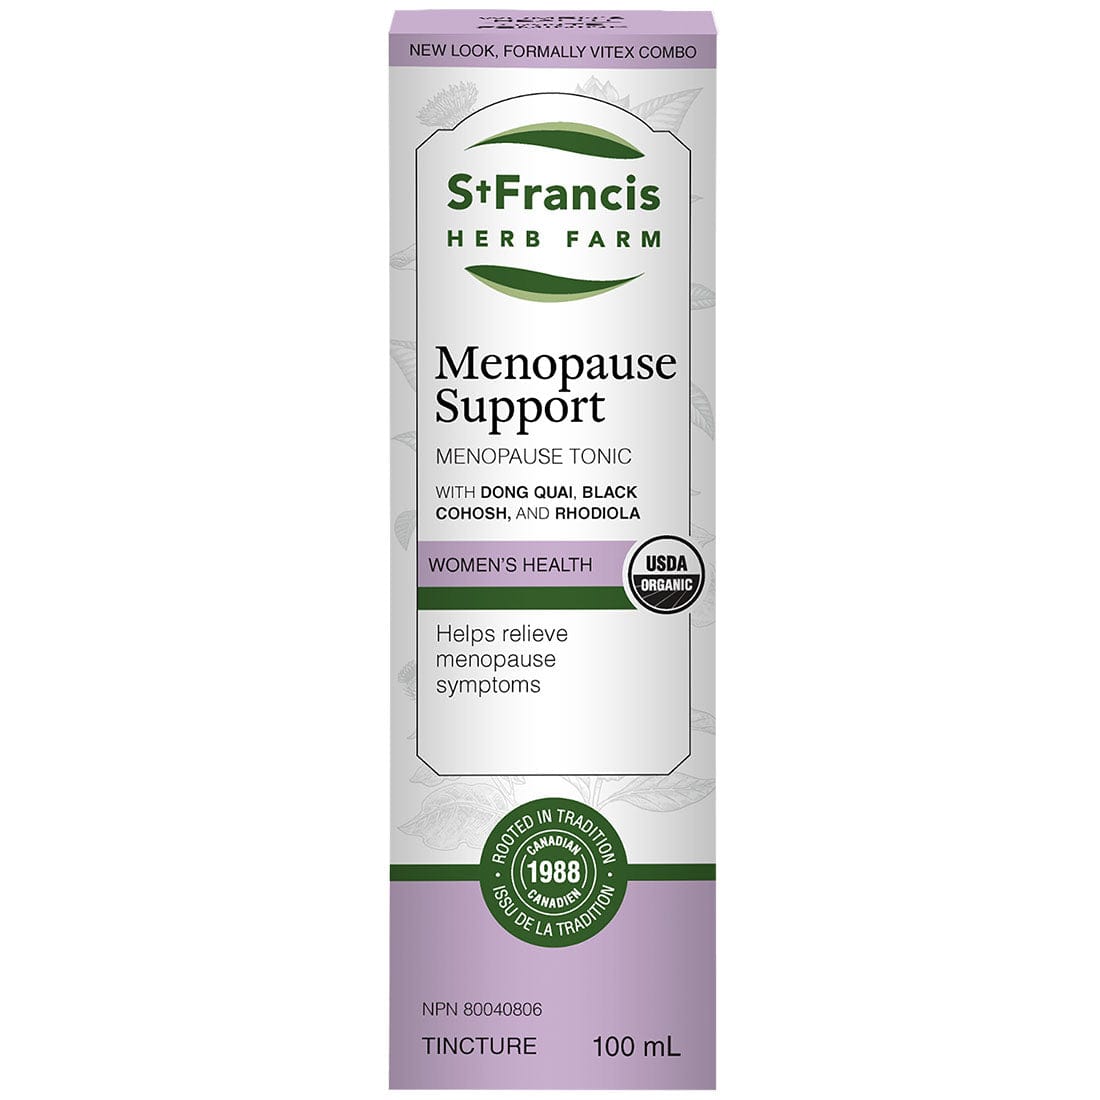 St. Francis Menopause Support (Formerly Vitex Combo - Menopause)